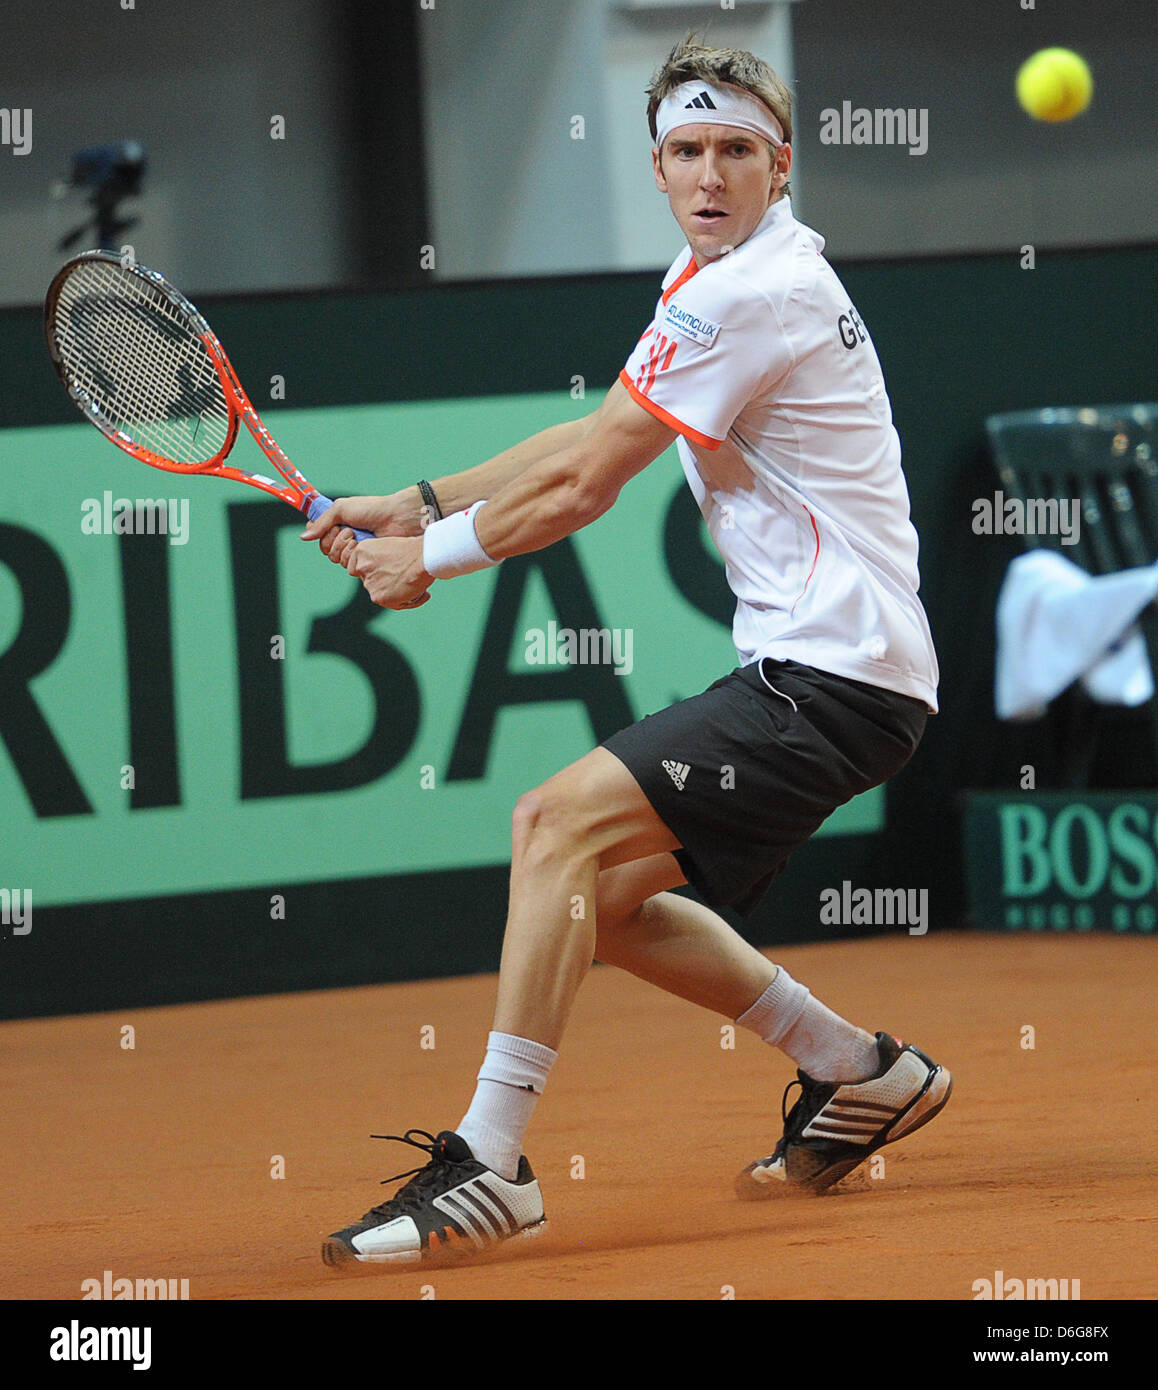 German tennis player Cedrik-Marcel Stebe plays the ball during the Davis  Cup tennis match against Argentina's Schwank at Stechert Arena in Bamberg,  Germany, 12 February 2012. From 10 to 12 February, the